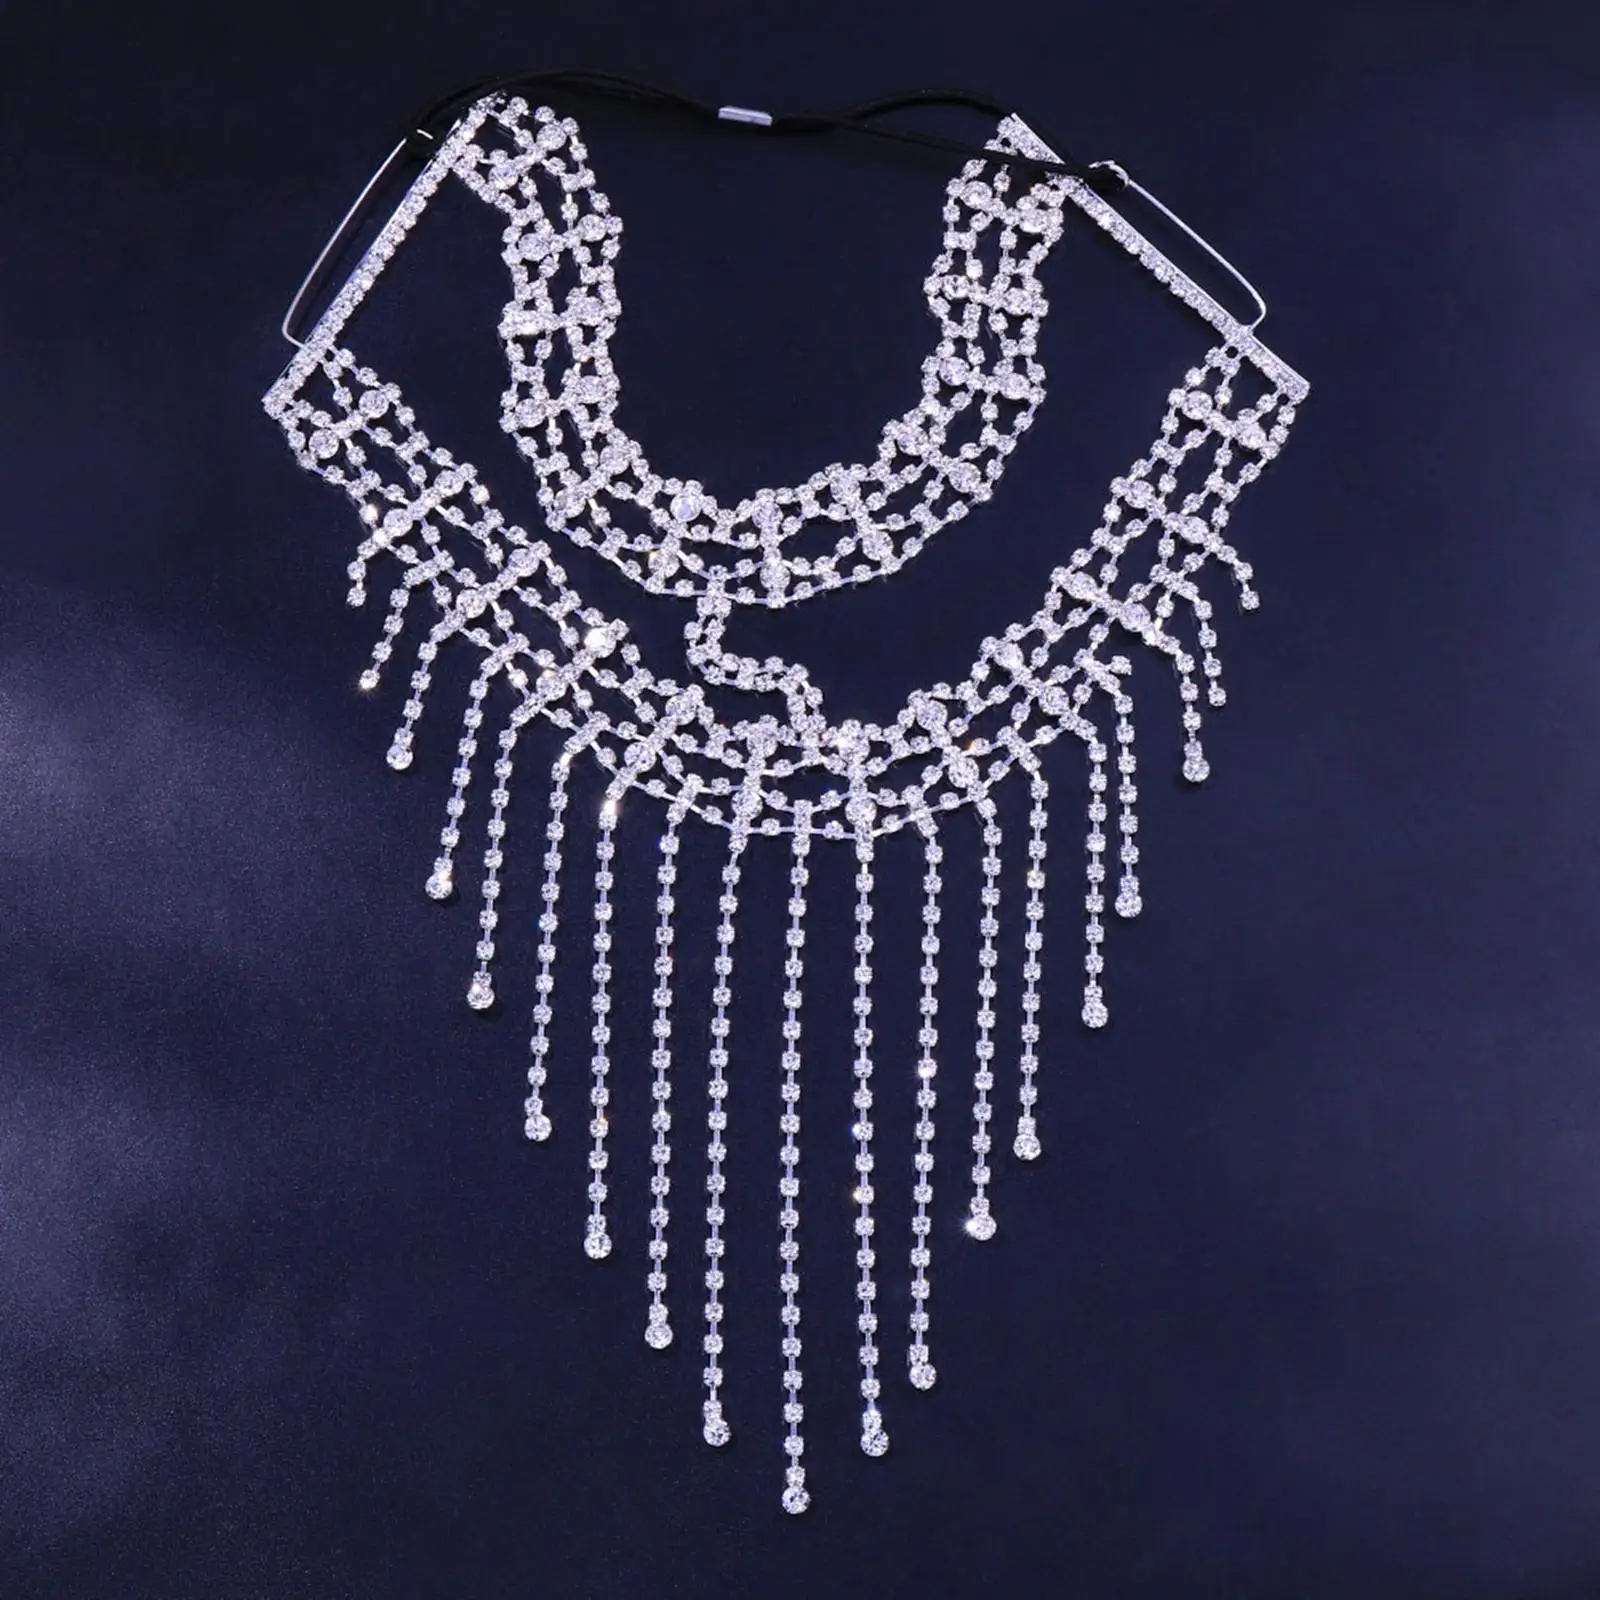 Shiny Women Veil Masquerade Rhinestone Chain Belly Dance Cosplay Headwear Crystal Face Mask for Party Fancy Dress Stage Dress up